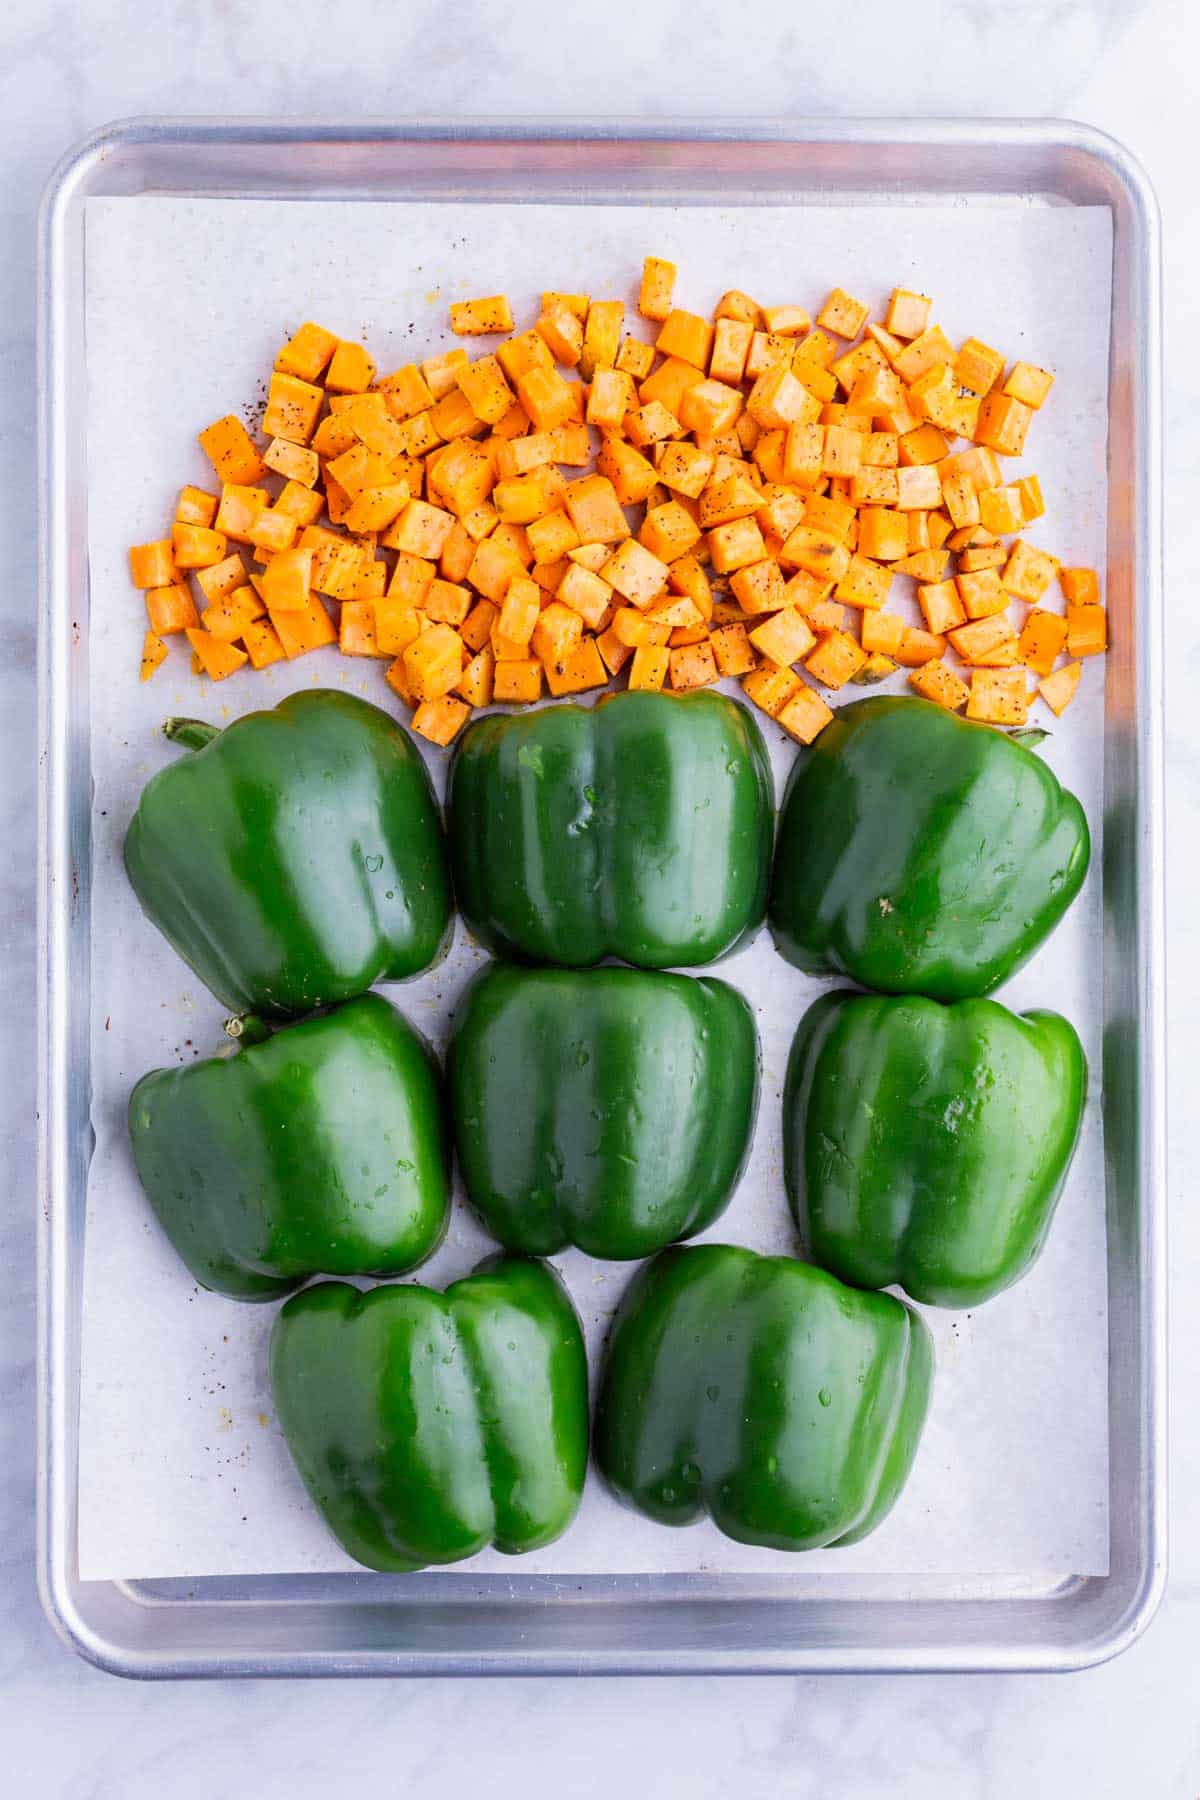 Bell peppers are added to the baking sheet with the sweet potatoes.